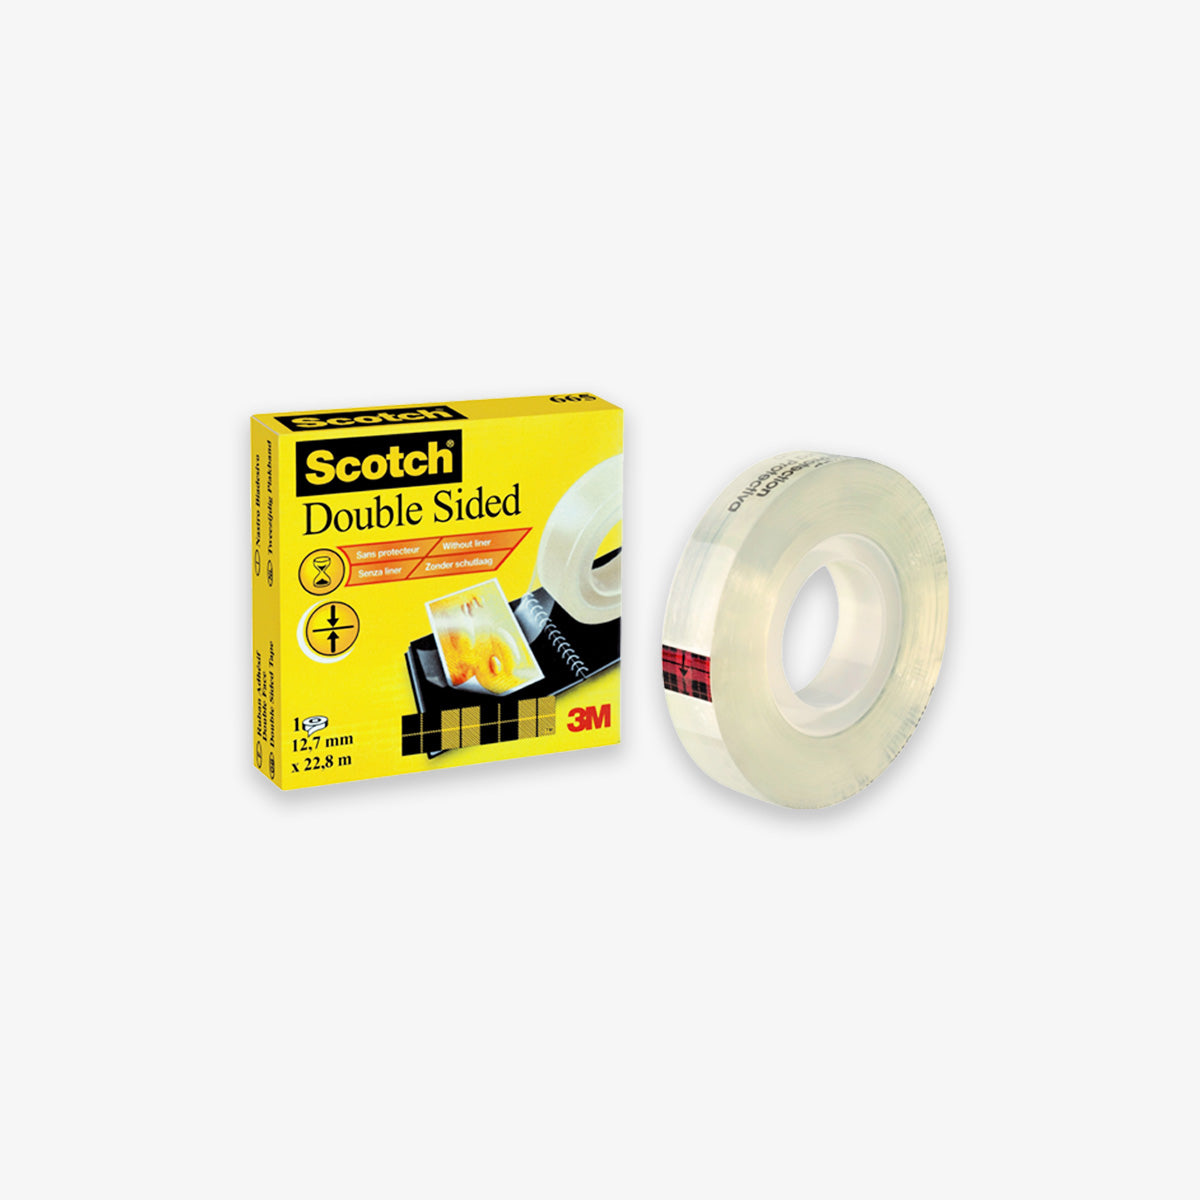 products/Doublesidedtape_Scotch_3M_01.jpg